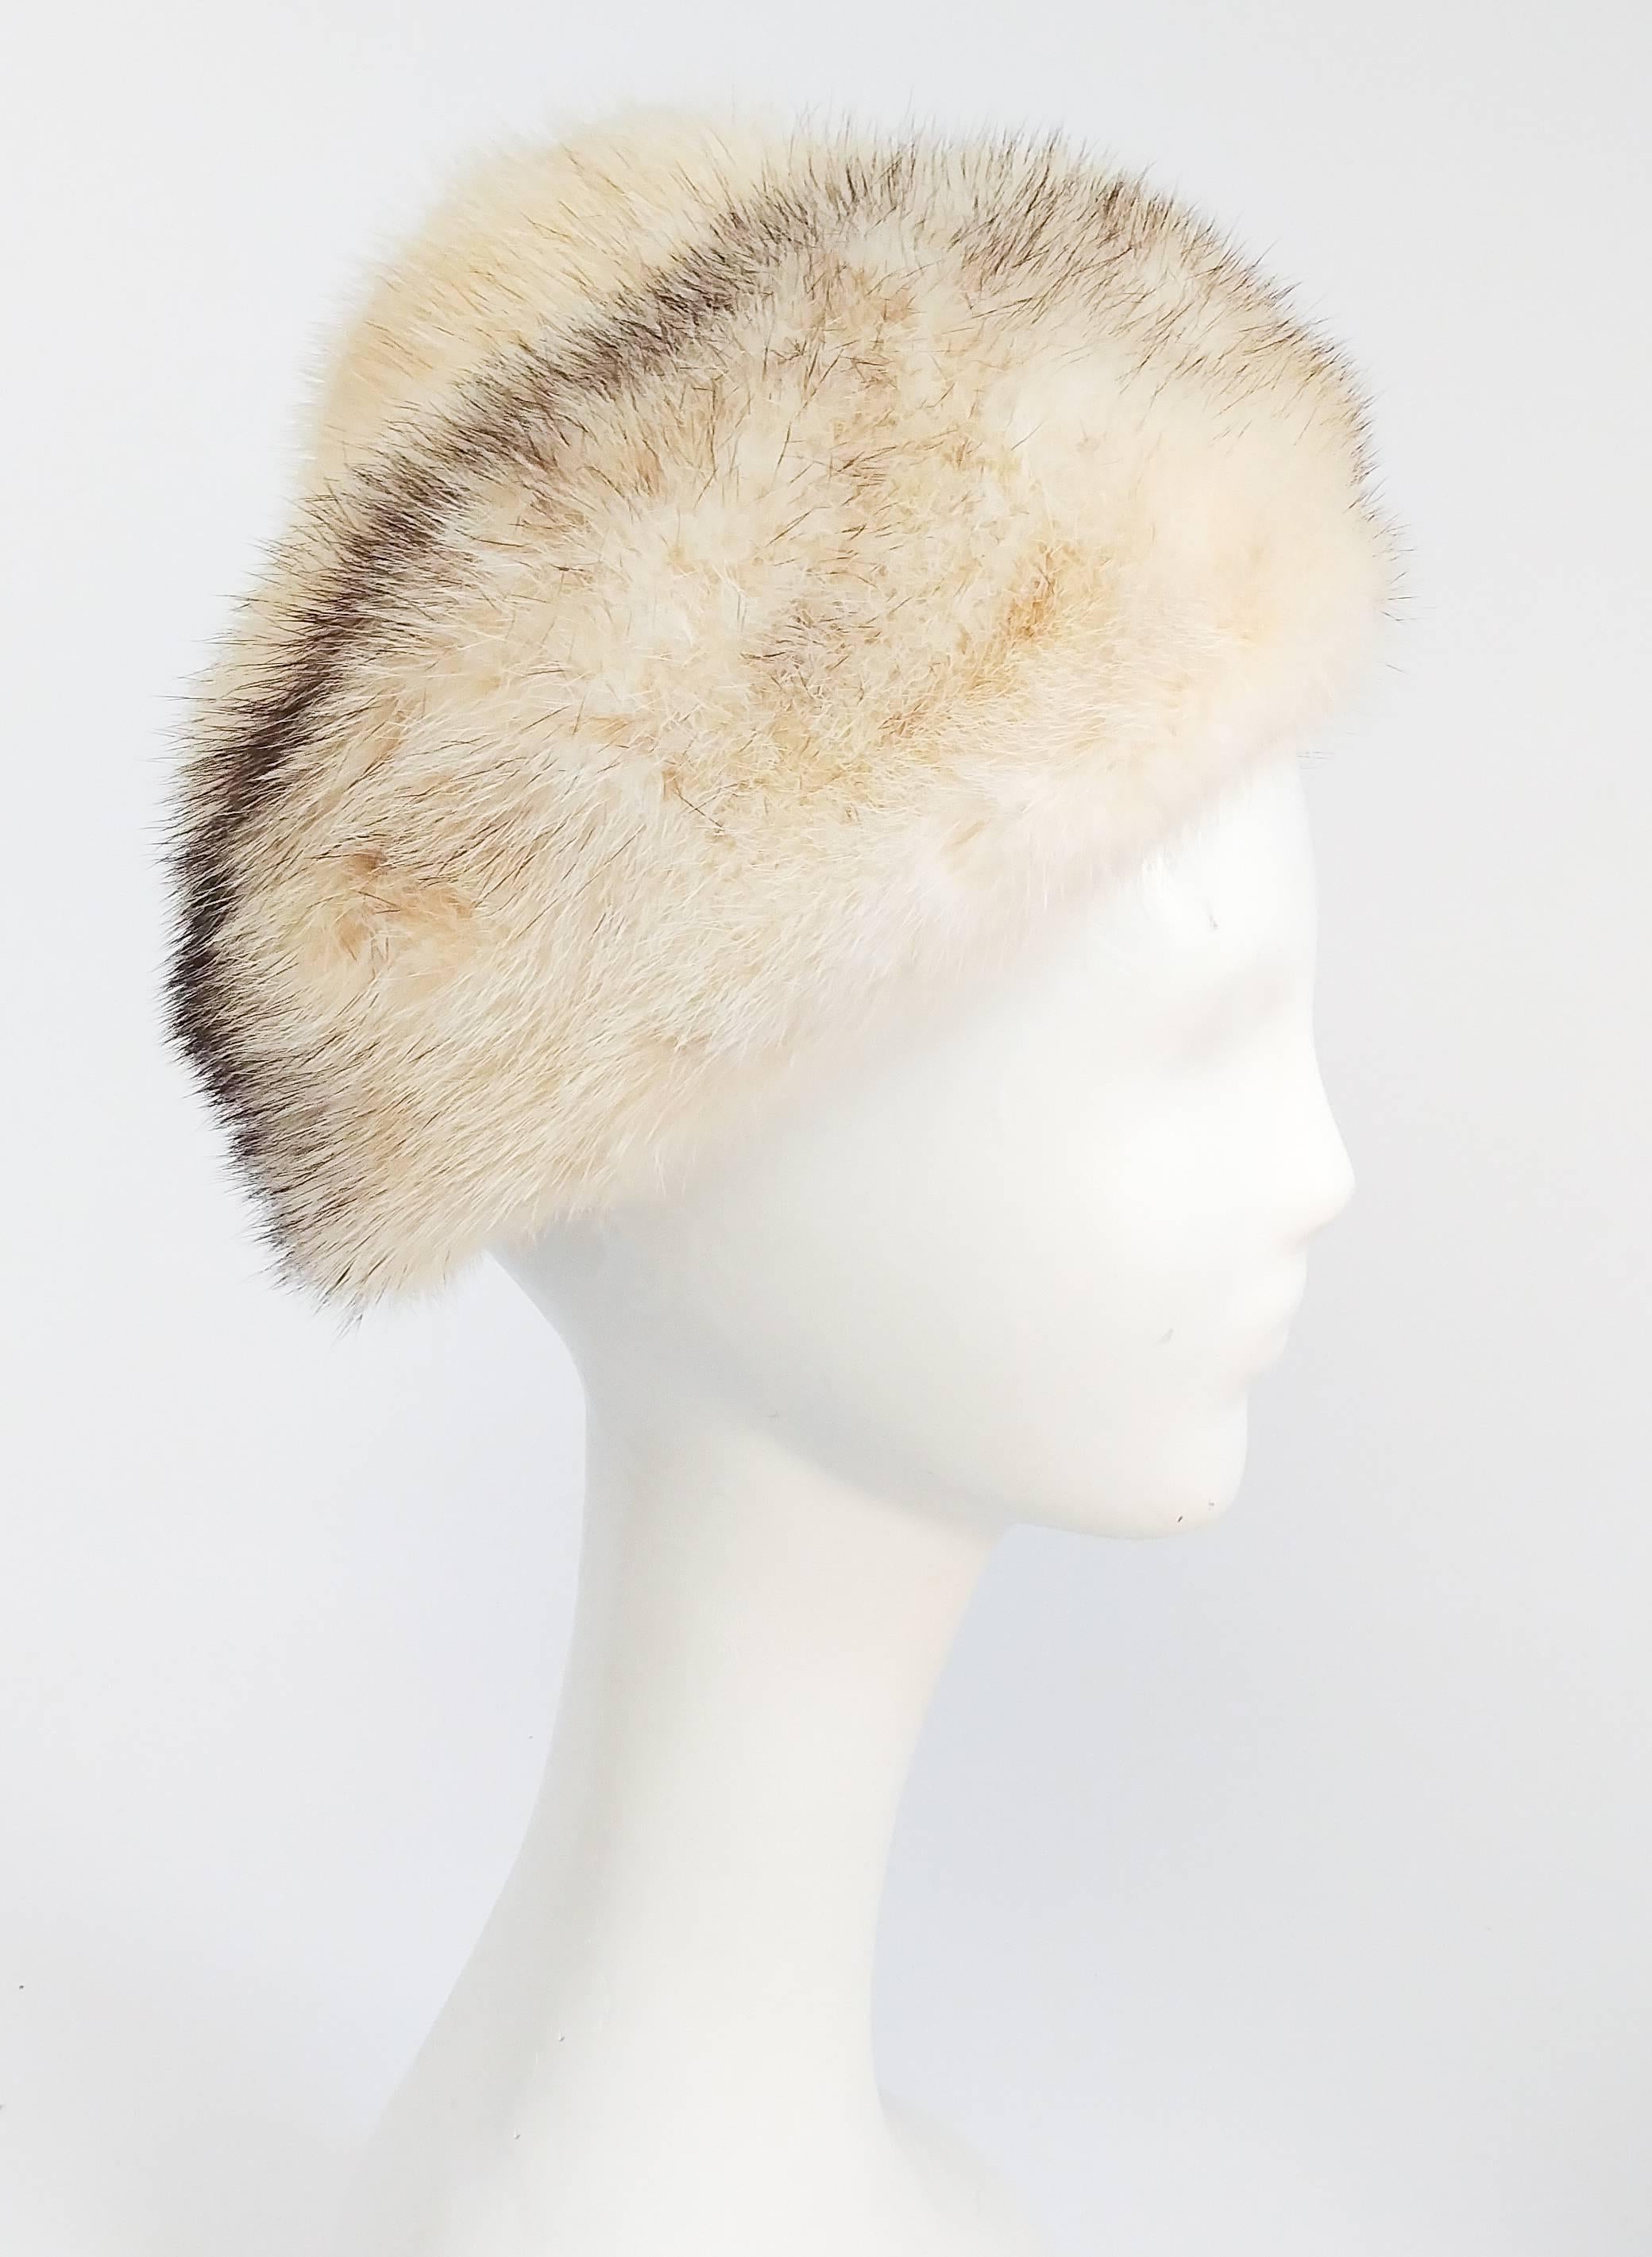 1960s Cream Cone Mink Hat. Worn perched towards back of head. Measures 17